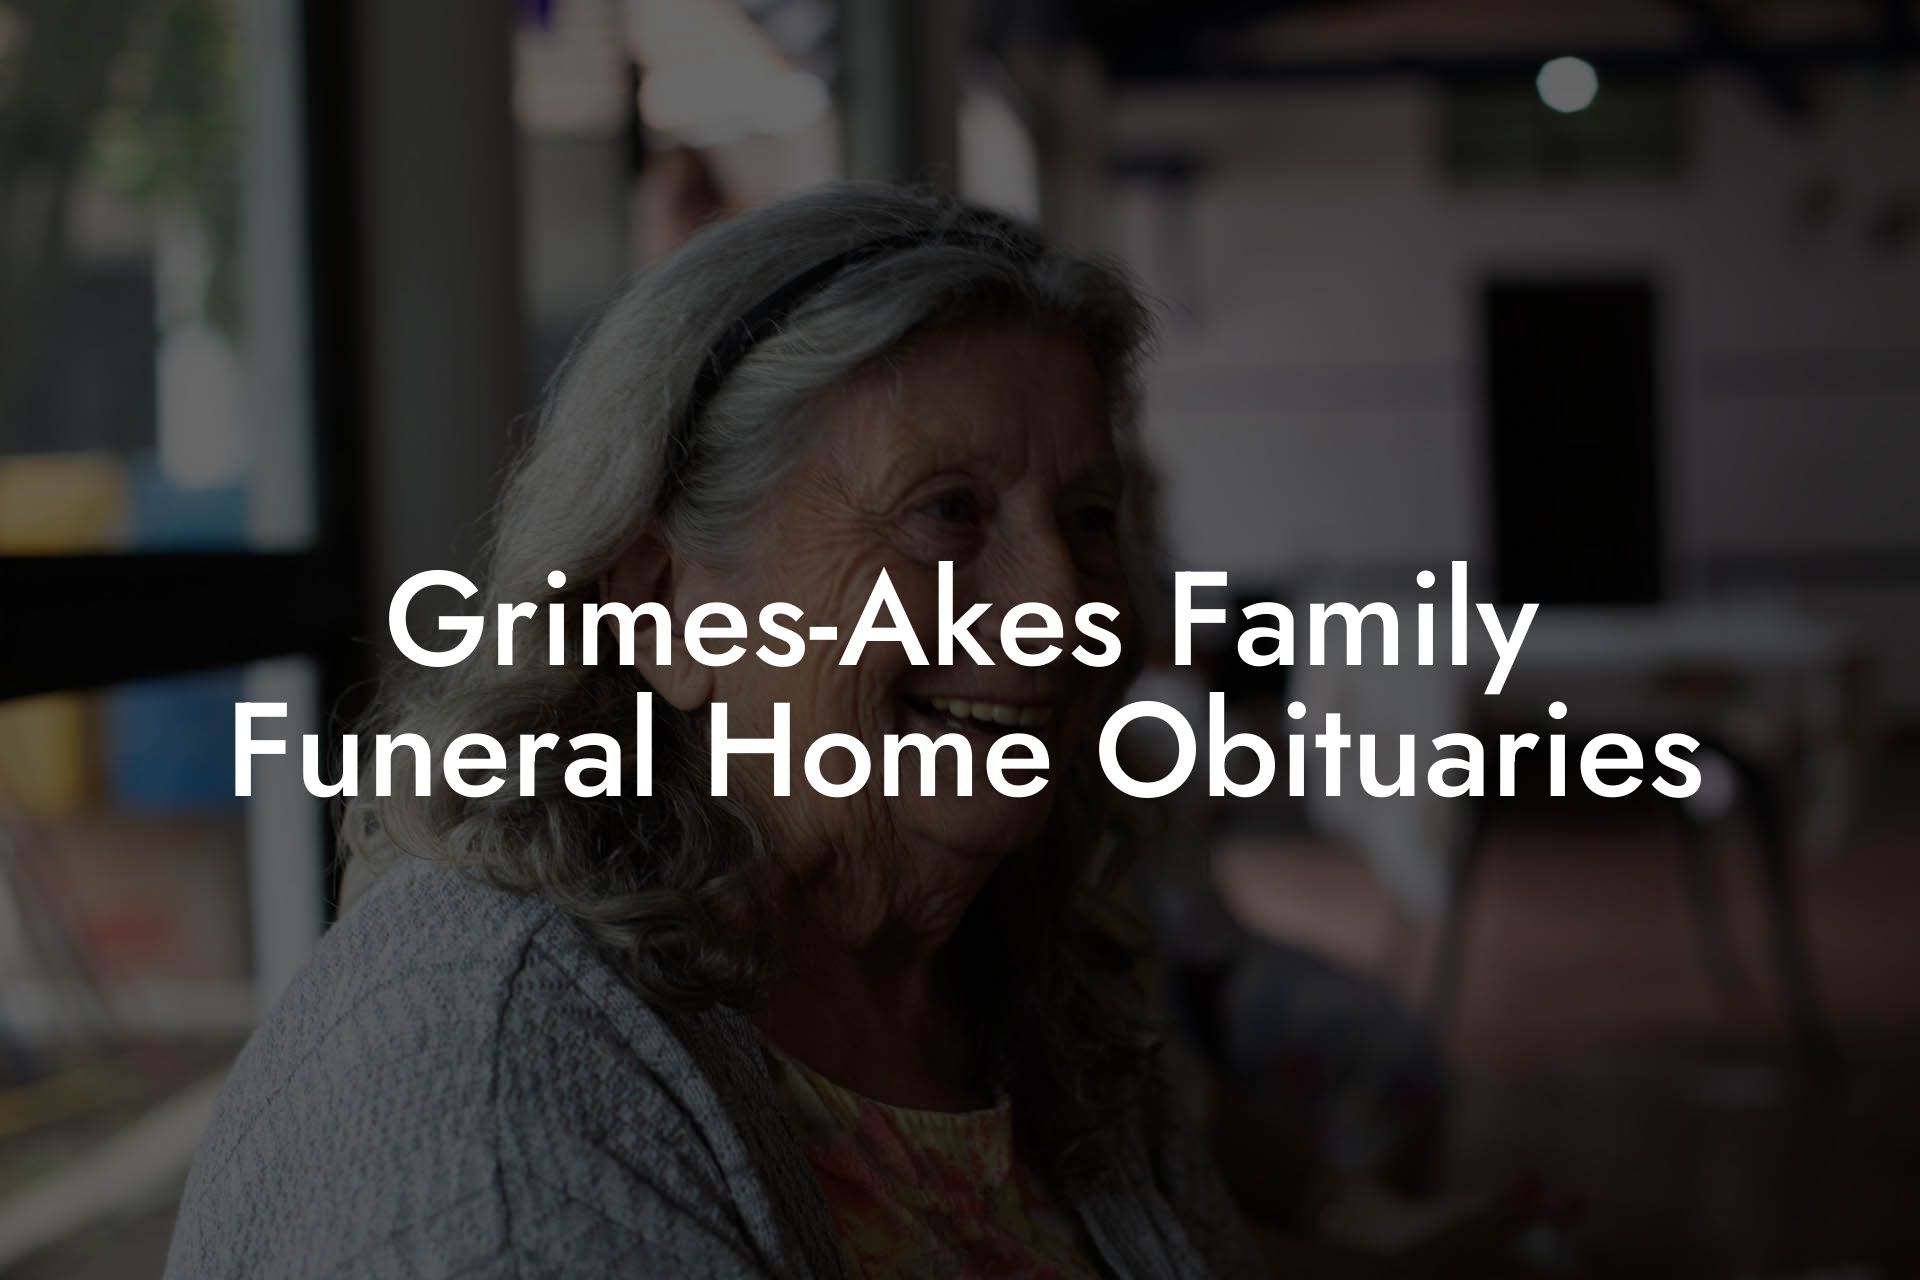 Grimes-Akes Family Funeral Home Obituaries